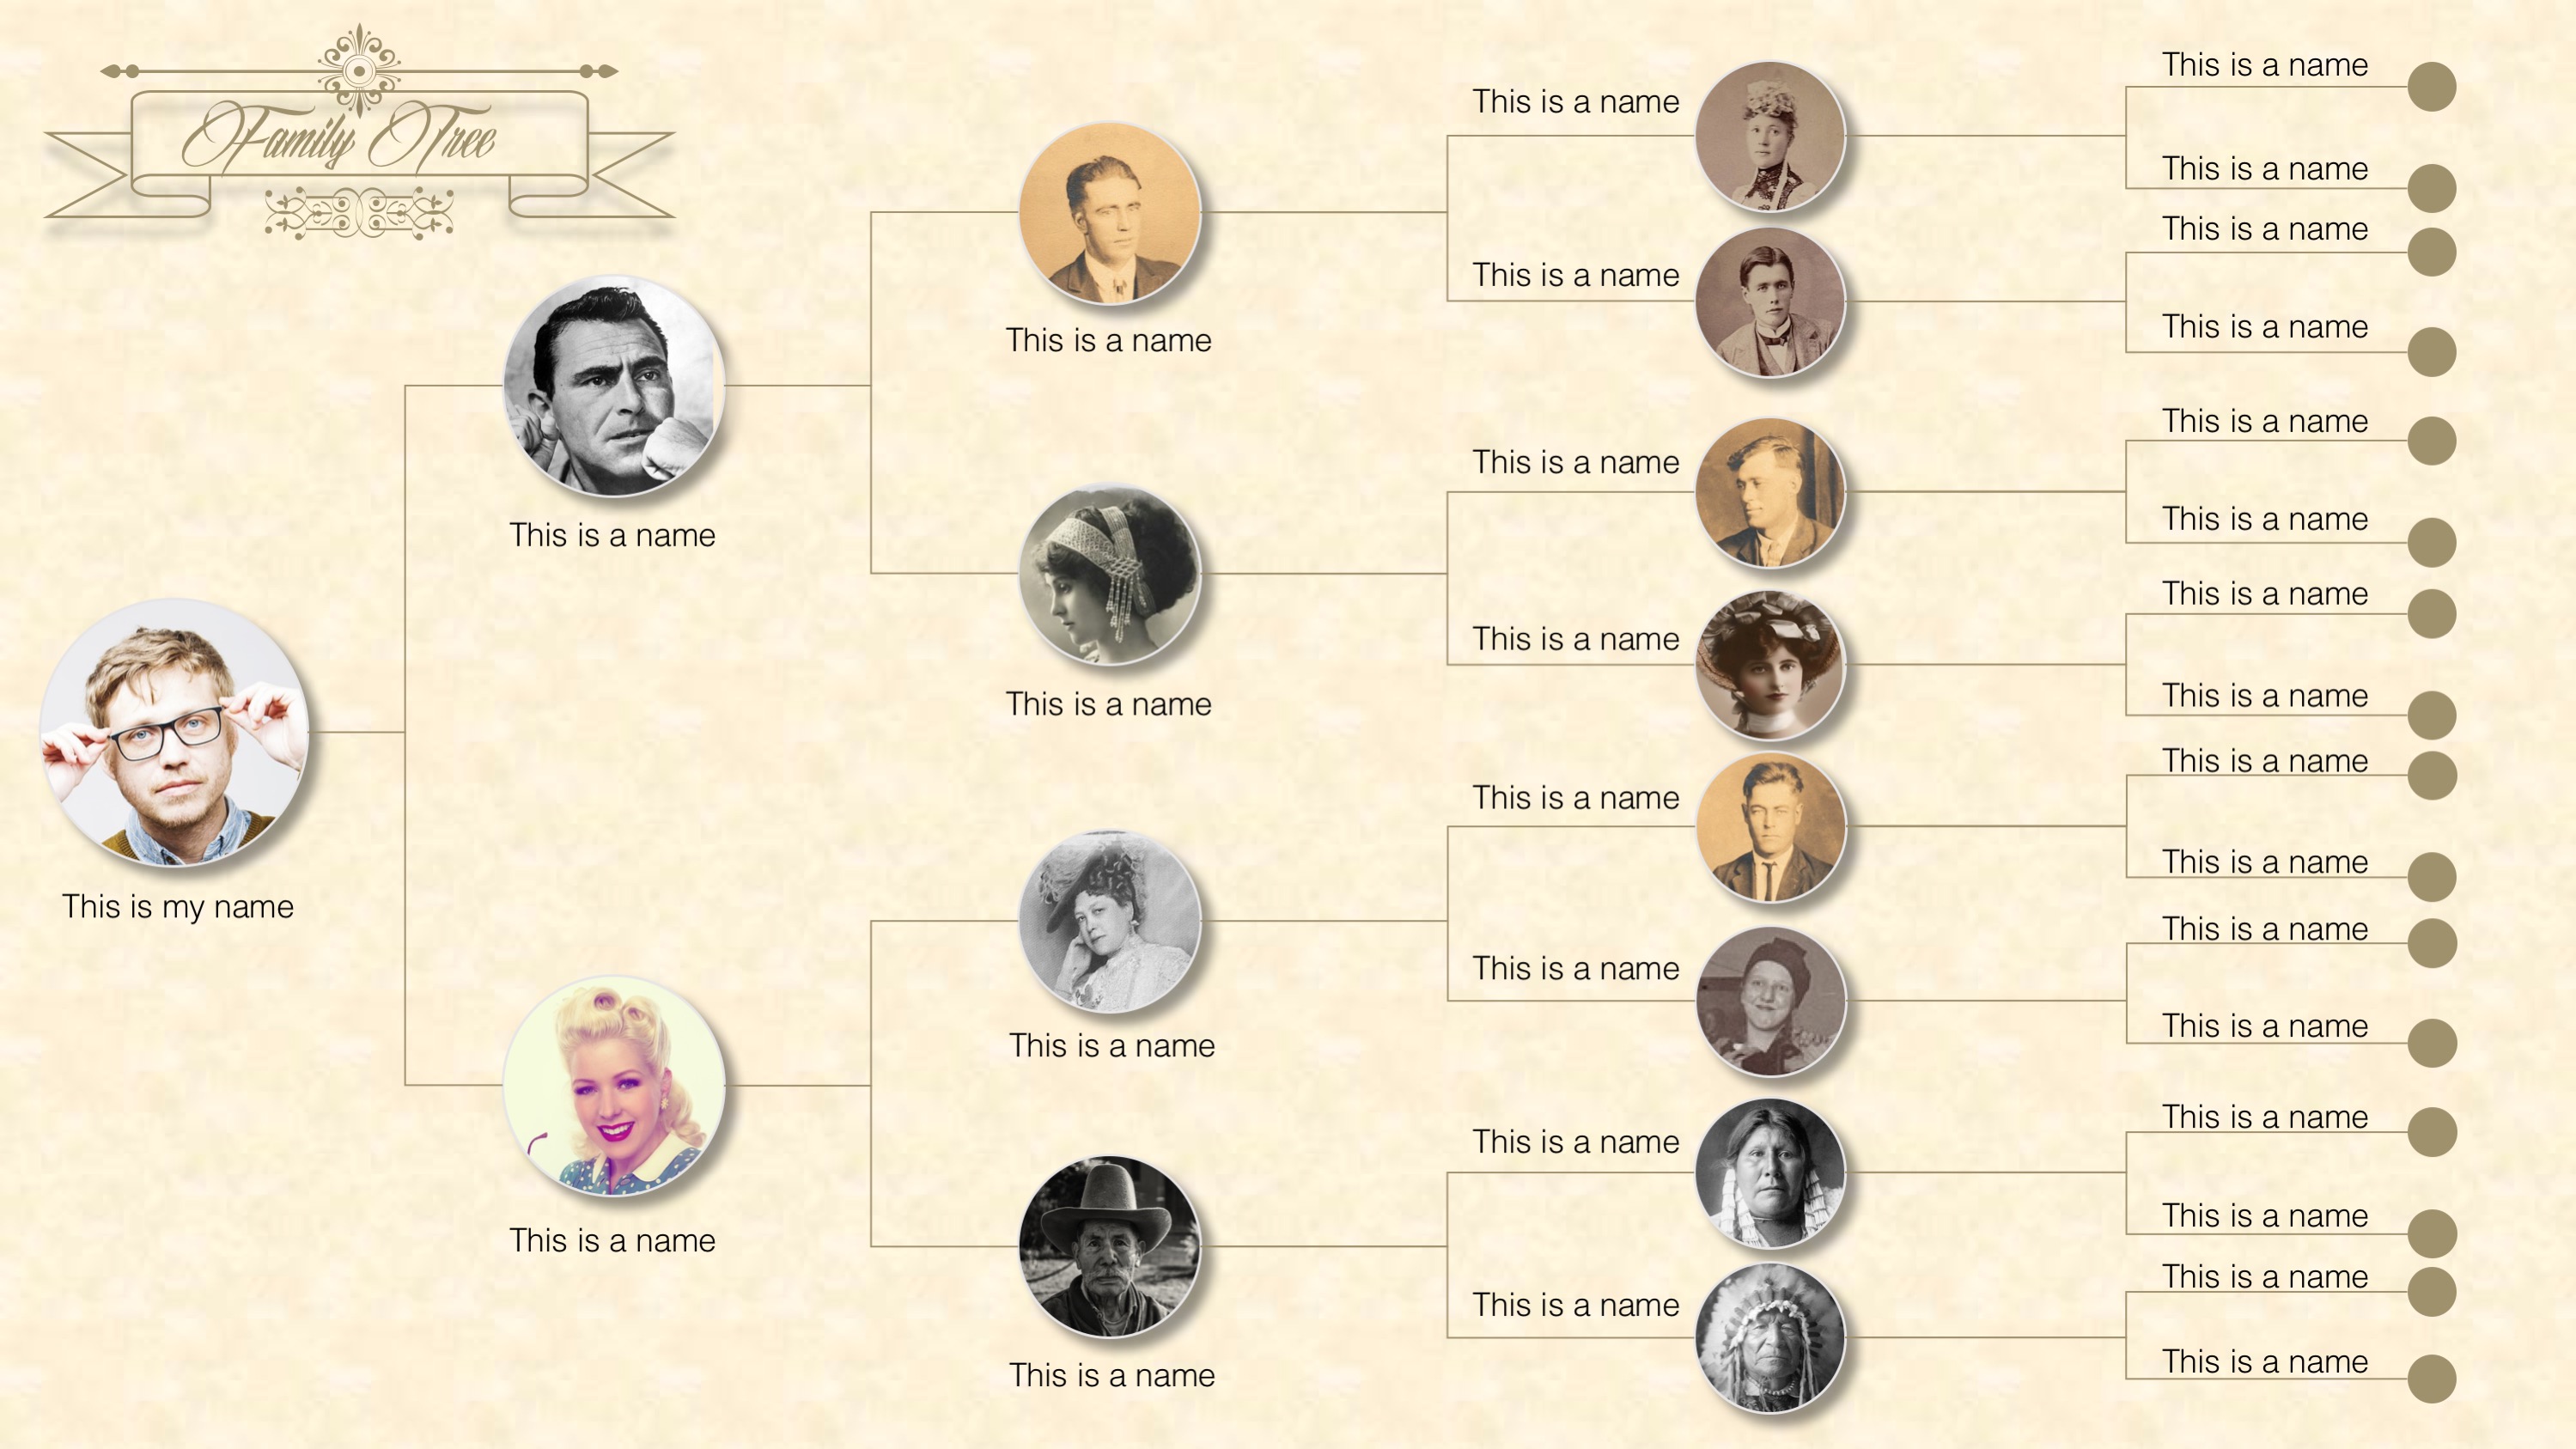 PPT Template of Family Tree